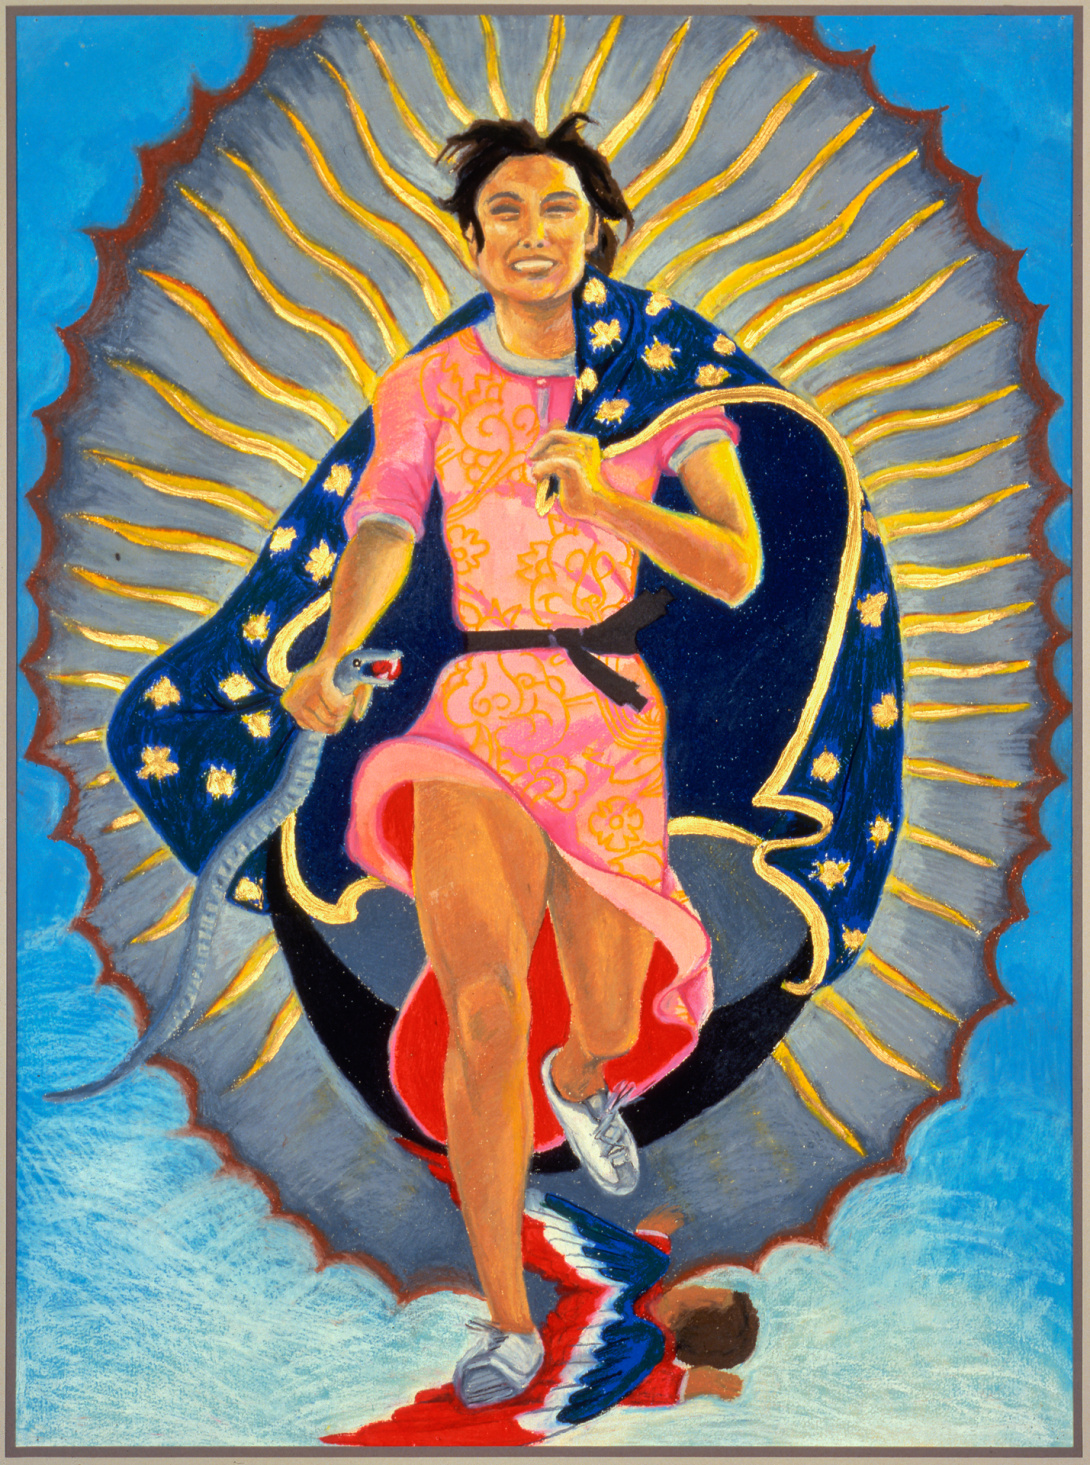 A painting of a golden brown woman smiling and running. She wears a pink dress and holds both a snake and a flag with stars trailing behind her. In the background is a shell-like oval design, like Boticelli's Venus. Beneath her is a winged cherub in red, white, and blue.